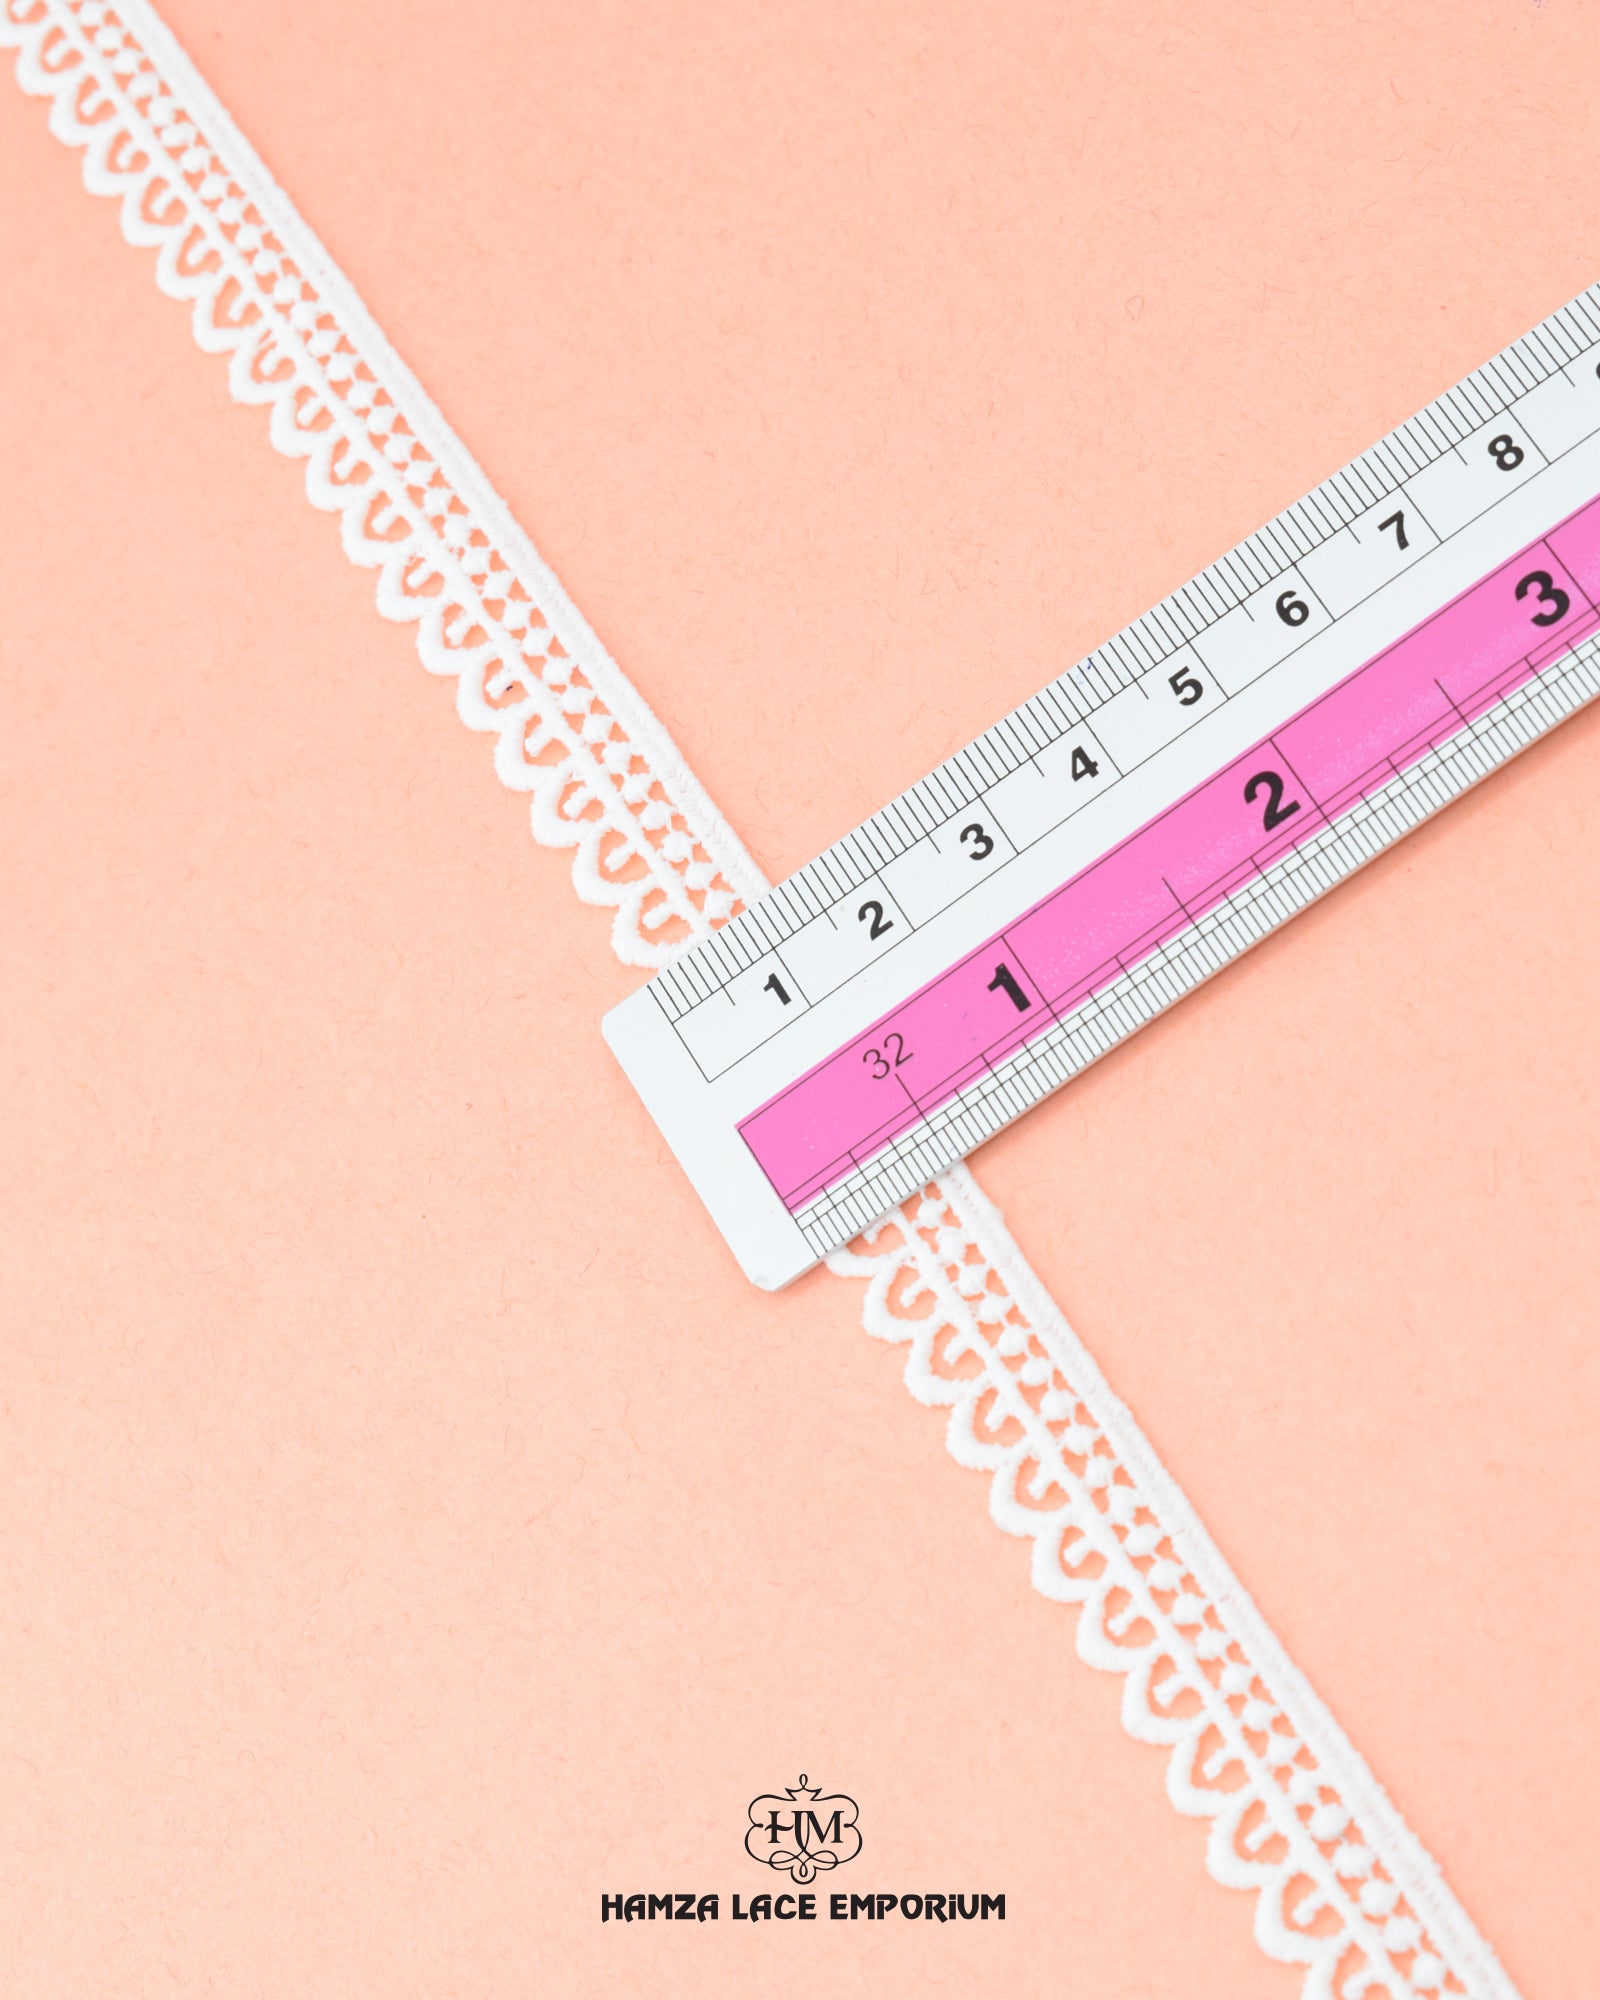 A ruler is measuring the size of the product 'Edging Scallop Lace 5934' and the 'Hamza lace' sign is written at the bottom